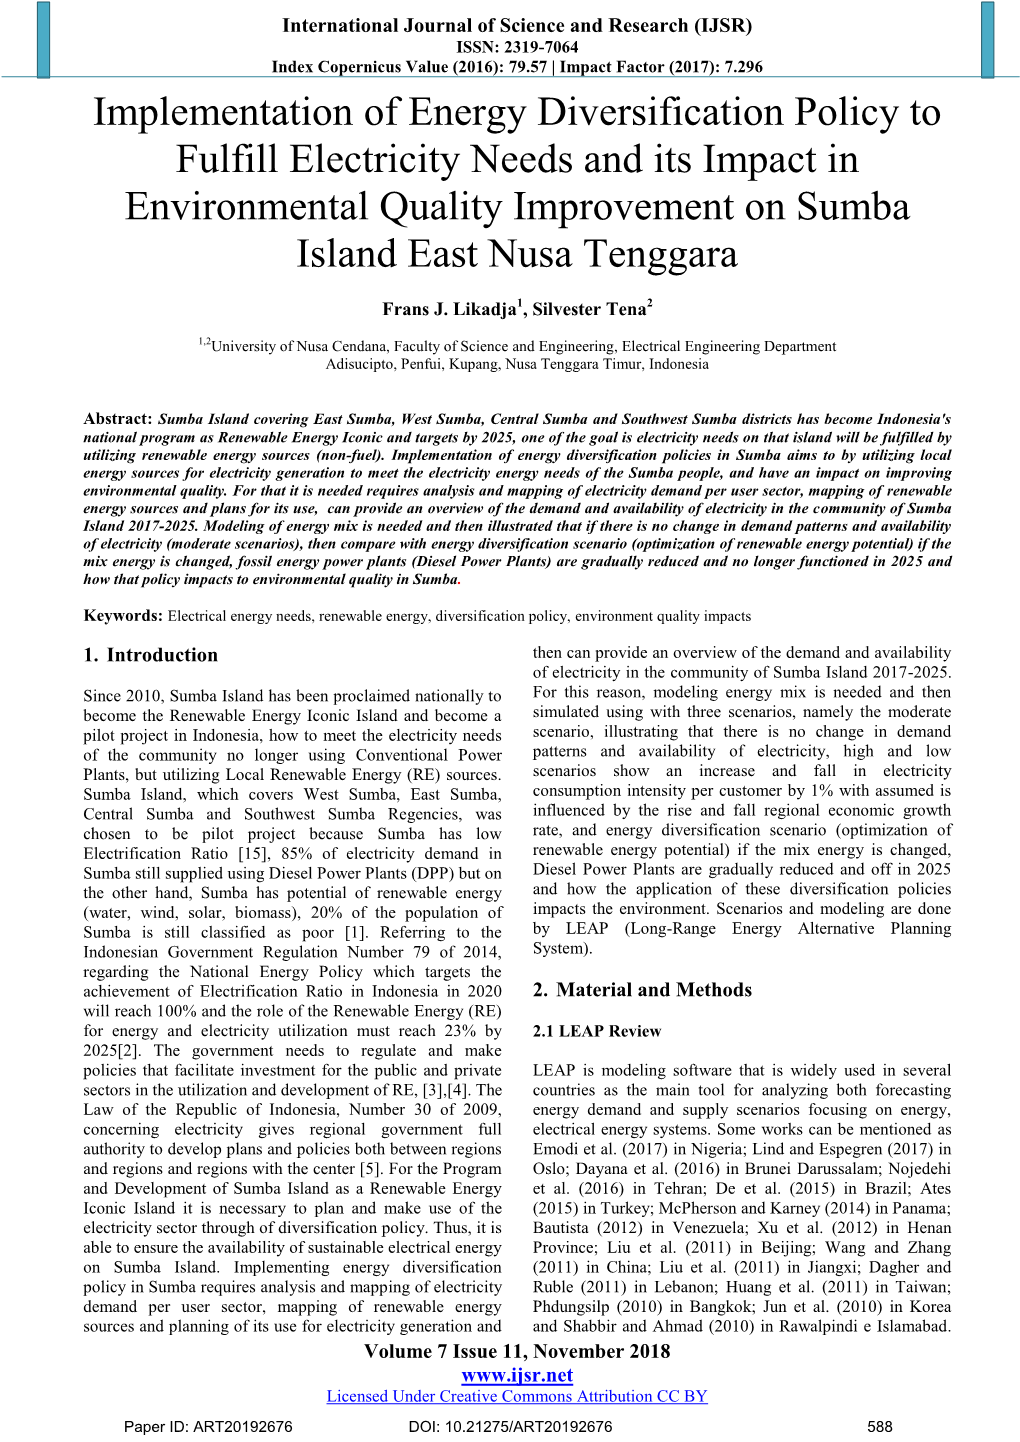 Implementation of Energy Diversification Policy to Fulfill Electricity Needs and Its Impact in Environmental Quality Improvement on Sumba Island East Nusa Tenggara